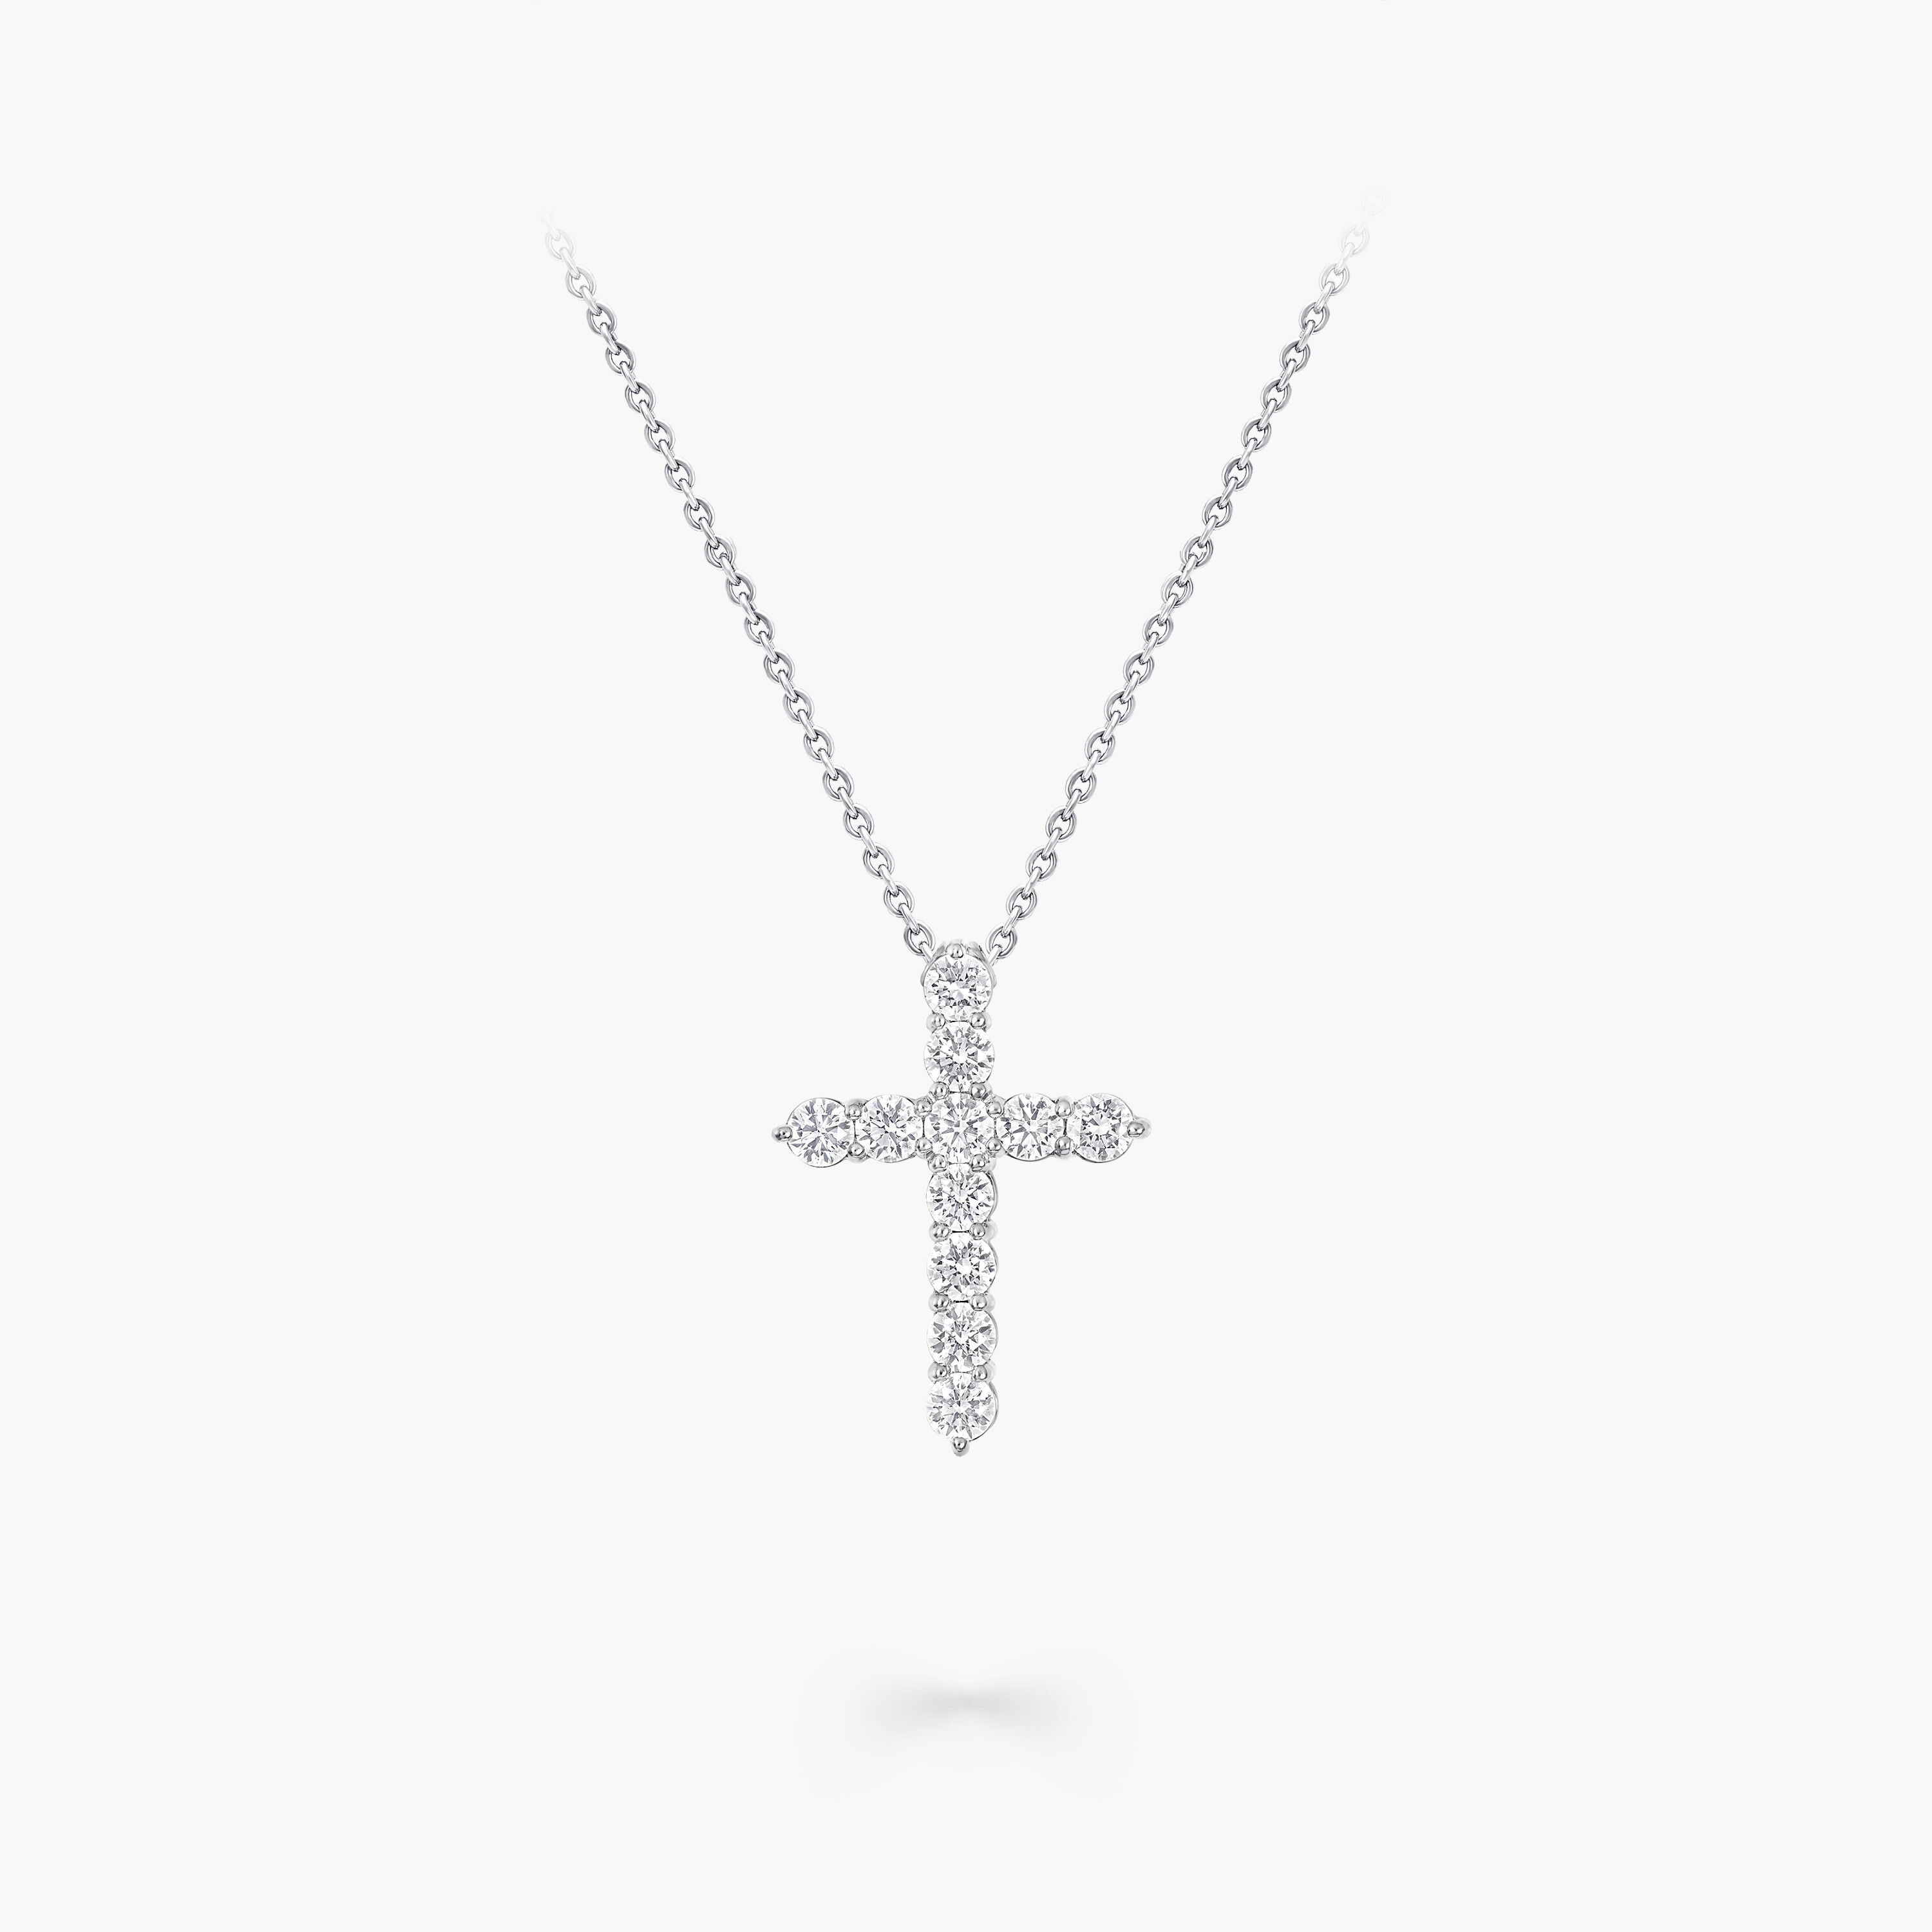 REAL Made-by-Order 9K White Gold Natural Diamonds Cross Necklace with 9K Chain 